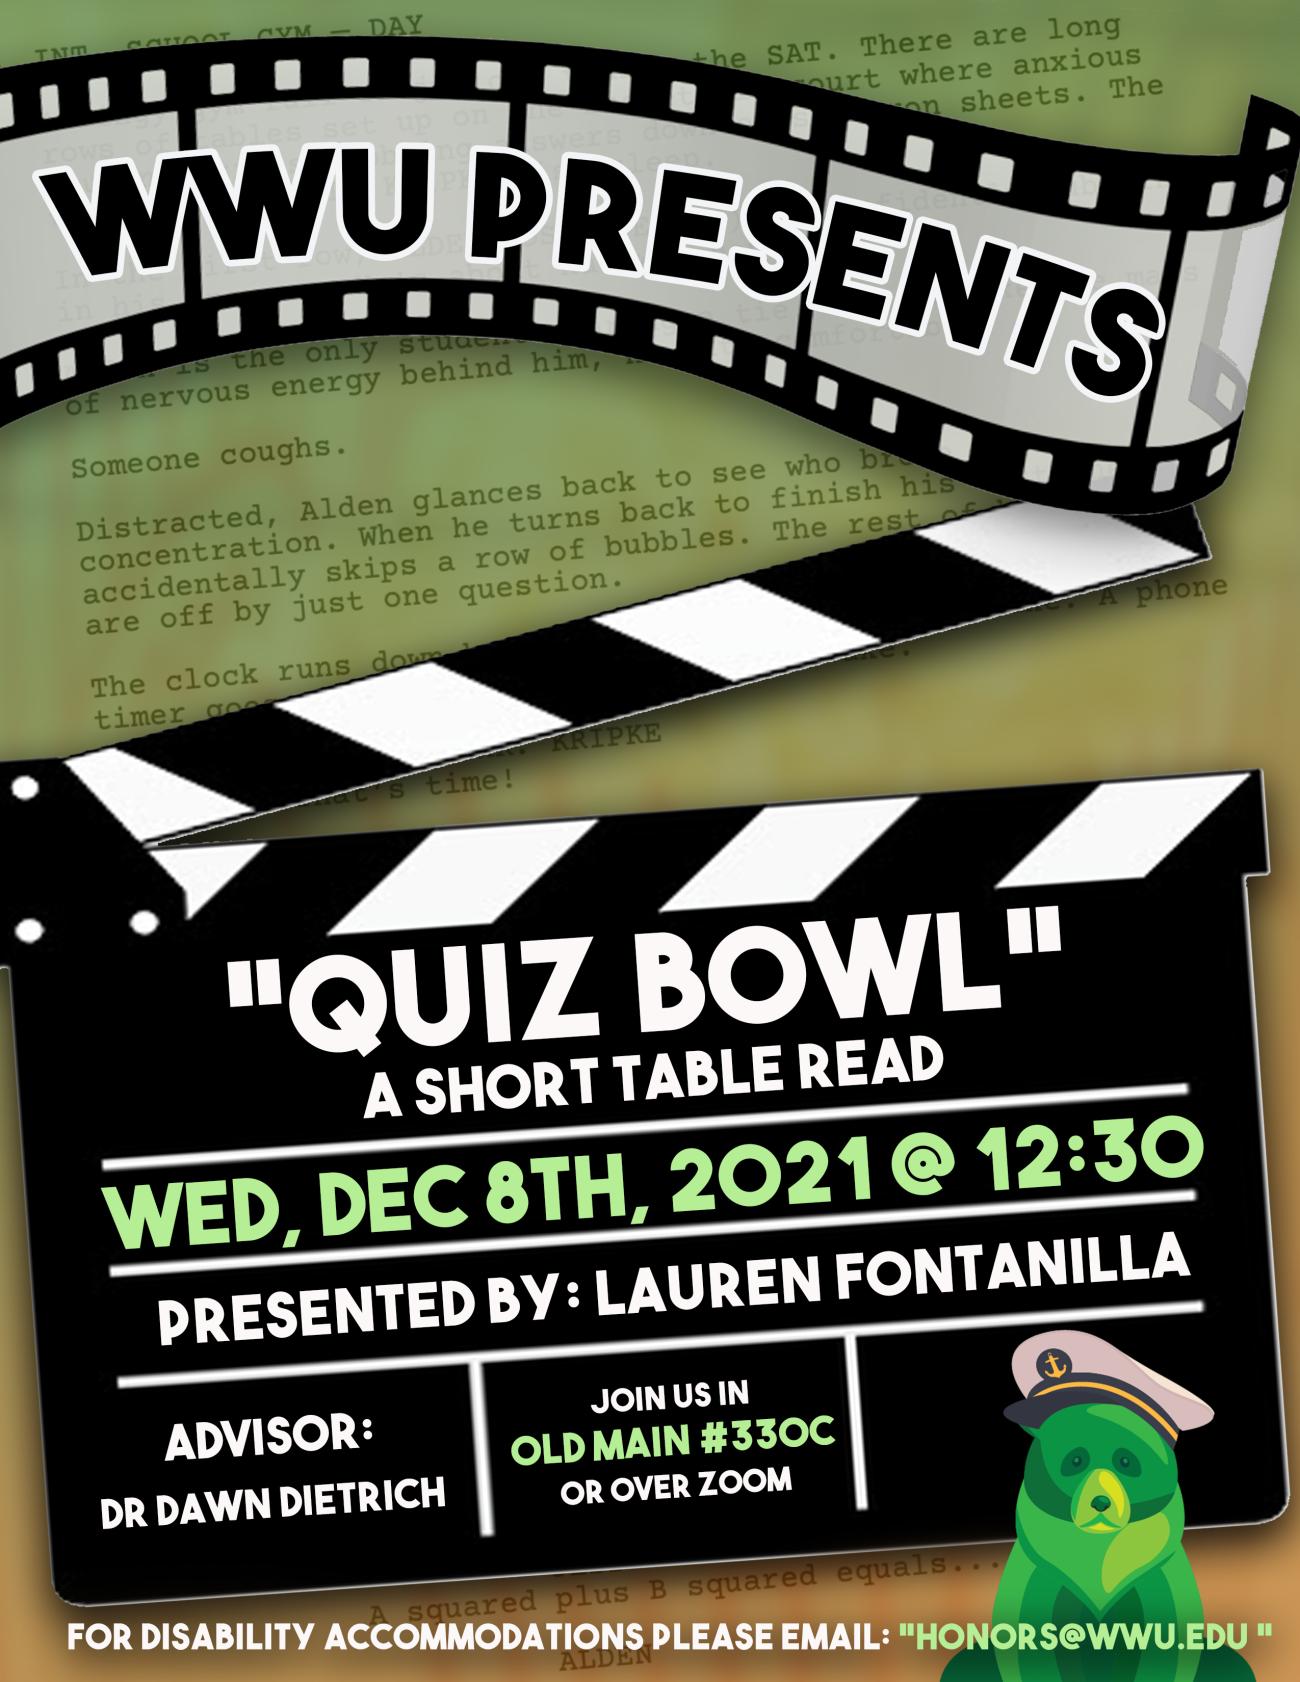 A poster with movie imagery. The text reads: "WWU Presents: "Quiz Bowl" A Short Table Read. Wednesday, December 8th, 2021 at 12:30. Presented by: Lauren Fontanilla. Advisor: Dr. Dawn Dietrich. Join us in Old Main #330C or over zoom. For disability accommodations please email honors@wwu.edu" 